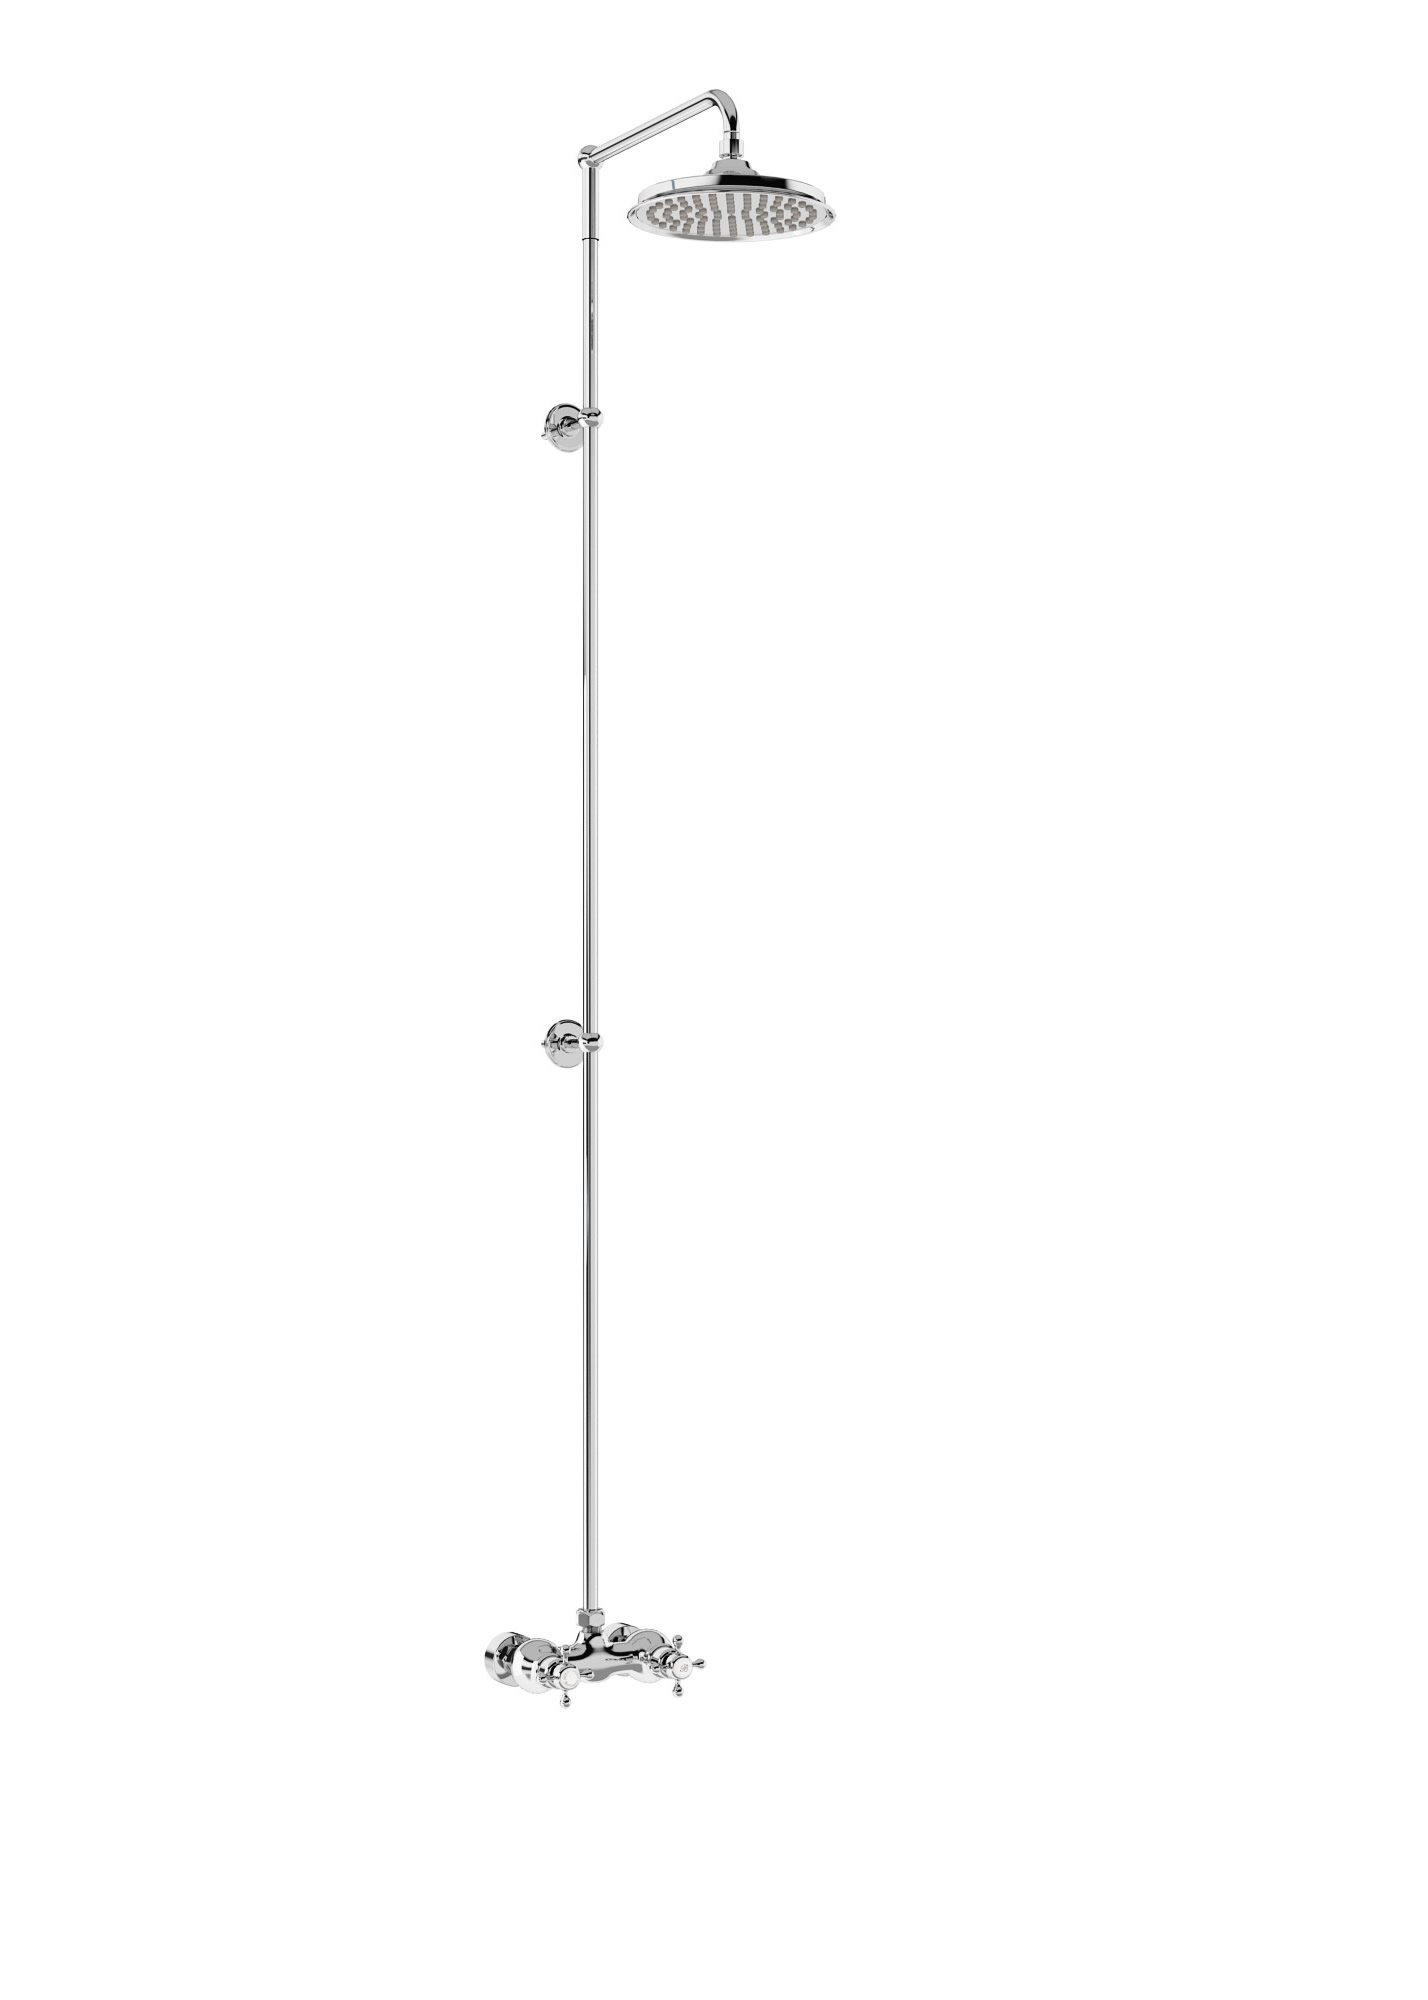 Eden Medici Thermostatic Exposed Shower Bar Valve Single Outlet with Extended Rigid Riser and Swivel Shower Arm with 6 inch rose 